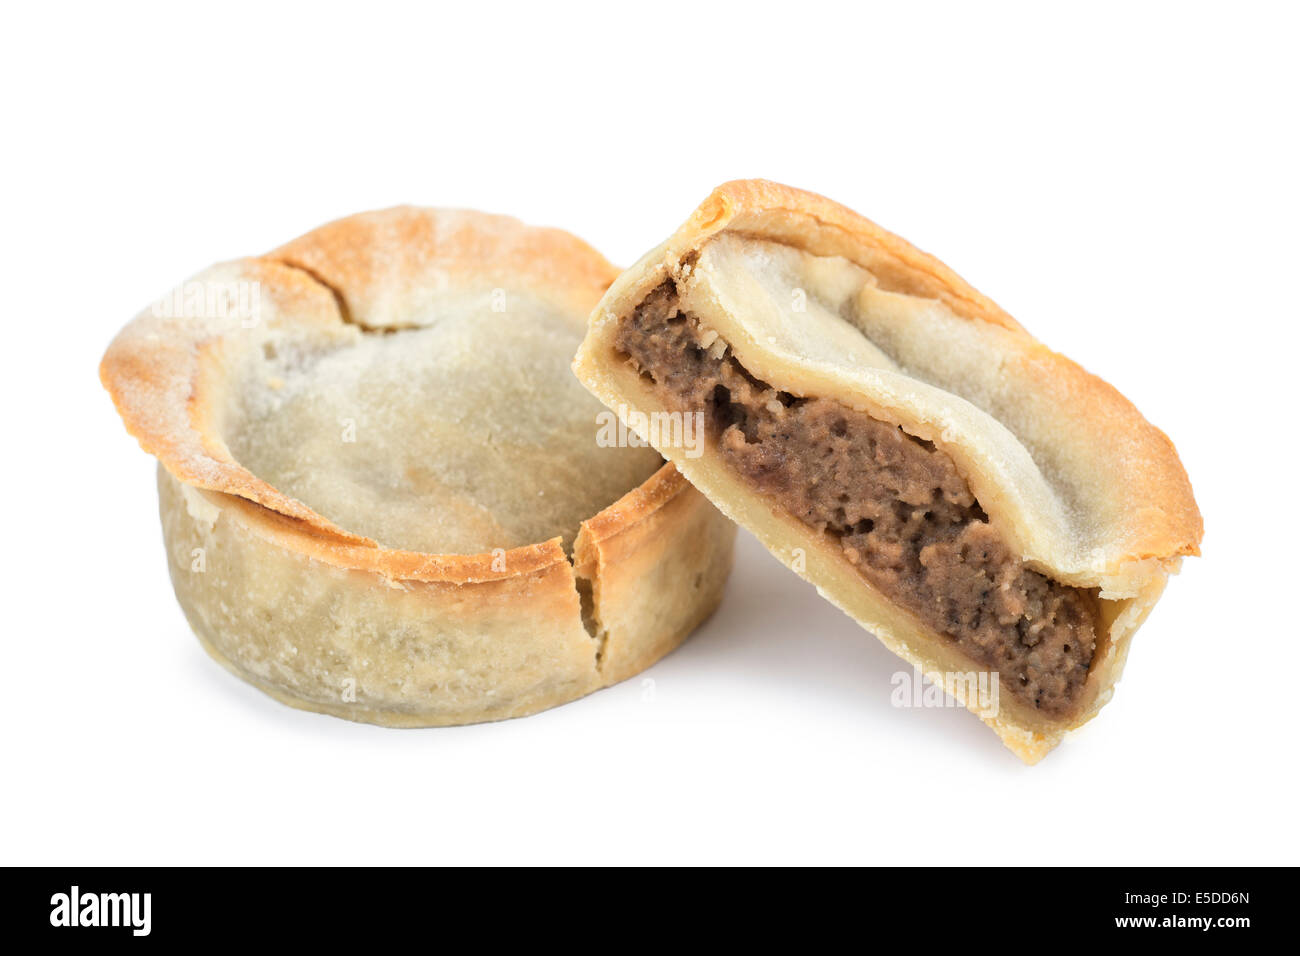 Beef Pie, Store bought Scottish Style Beef Pie Stock Photo